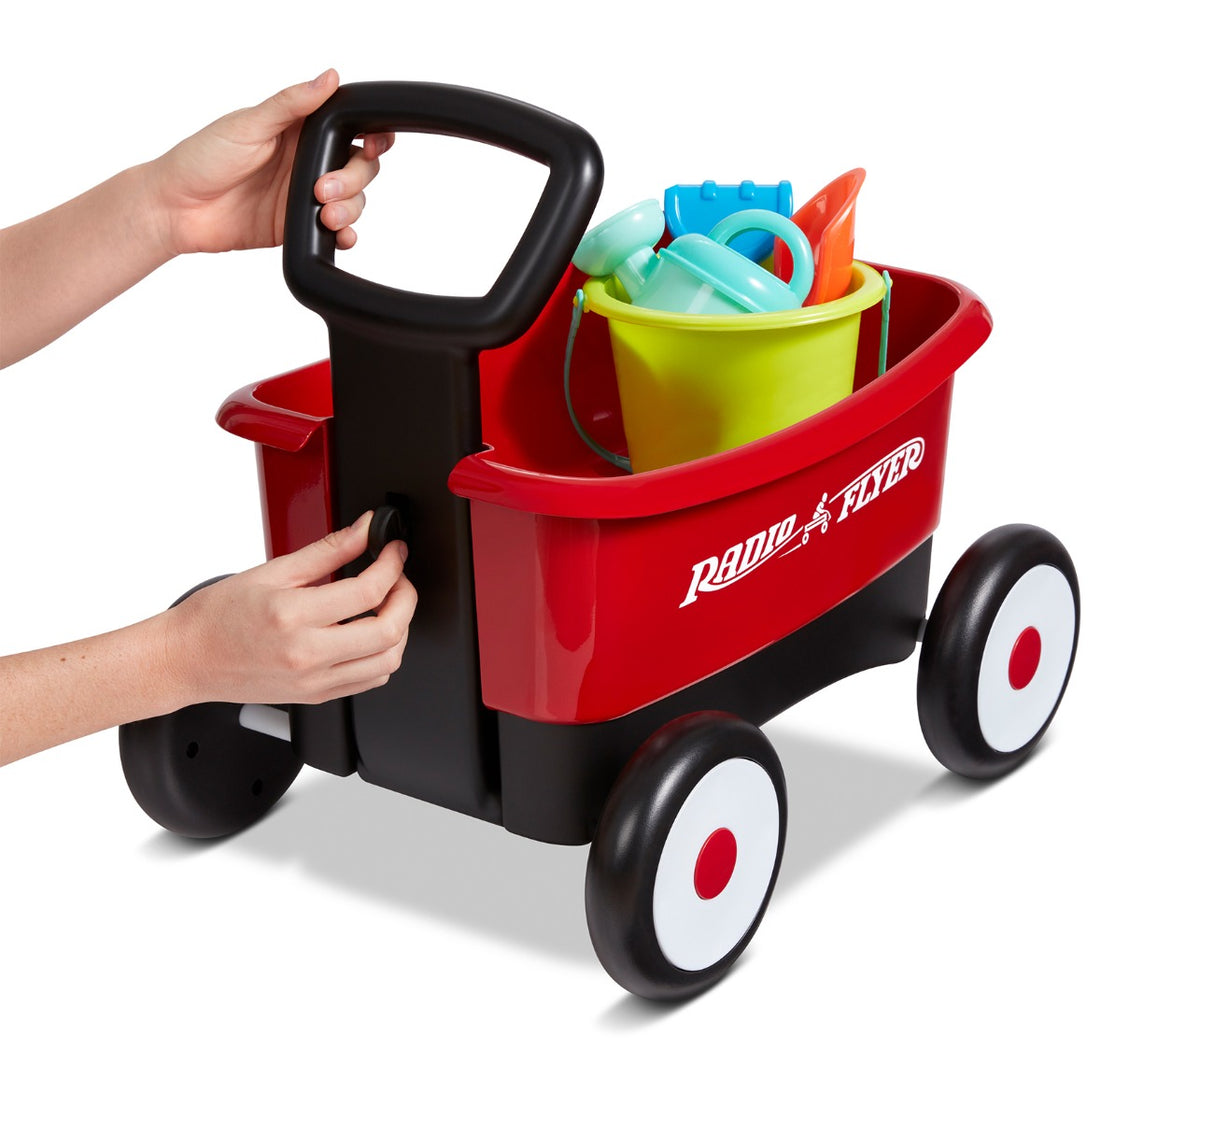 two ways to use toy wagon - push walker and pull wagon